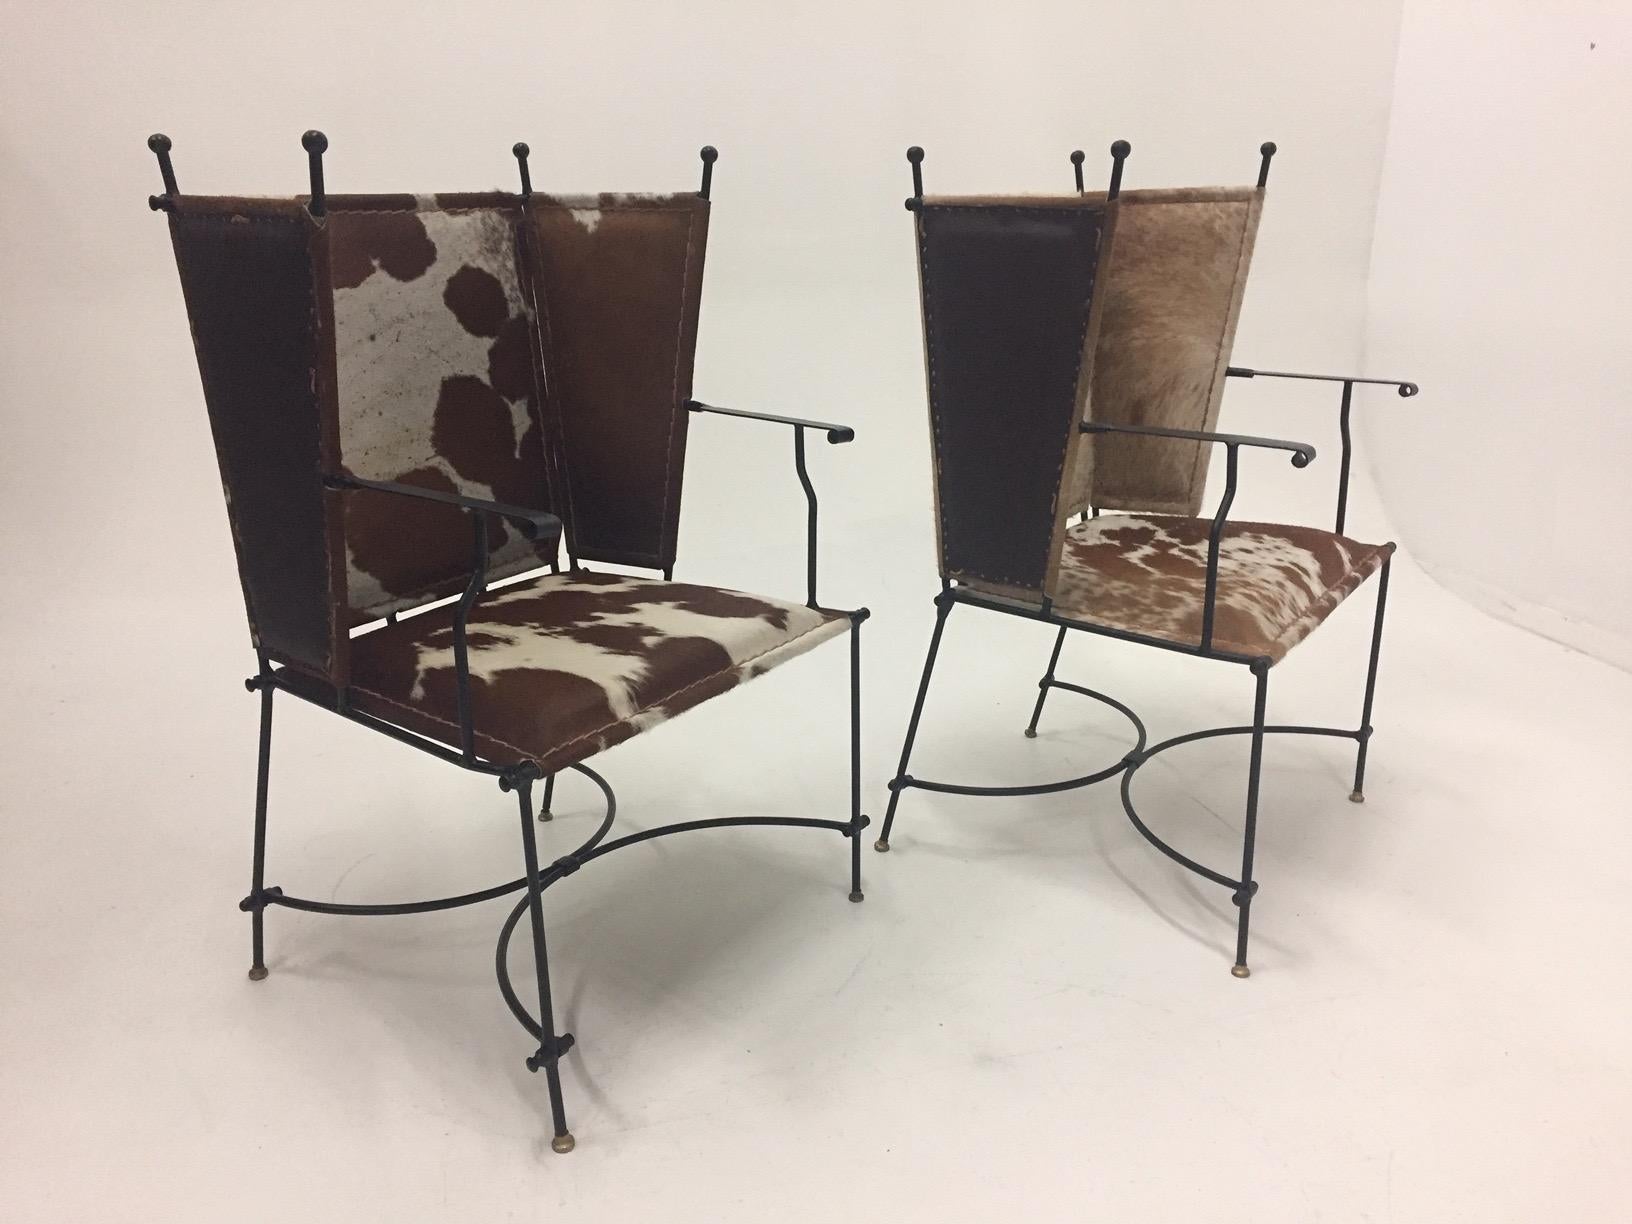 Sleek Pair of Wrought Iron Cowhide and Leather Mid-Century Modern Club Chairs 2